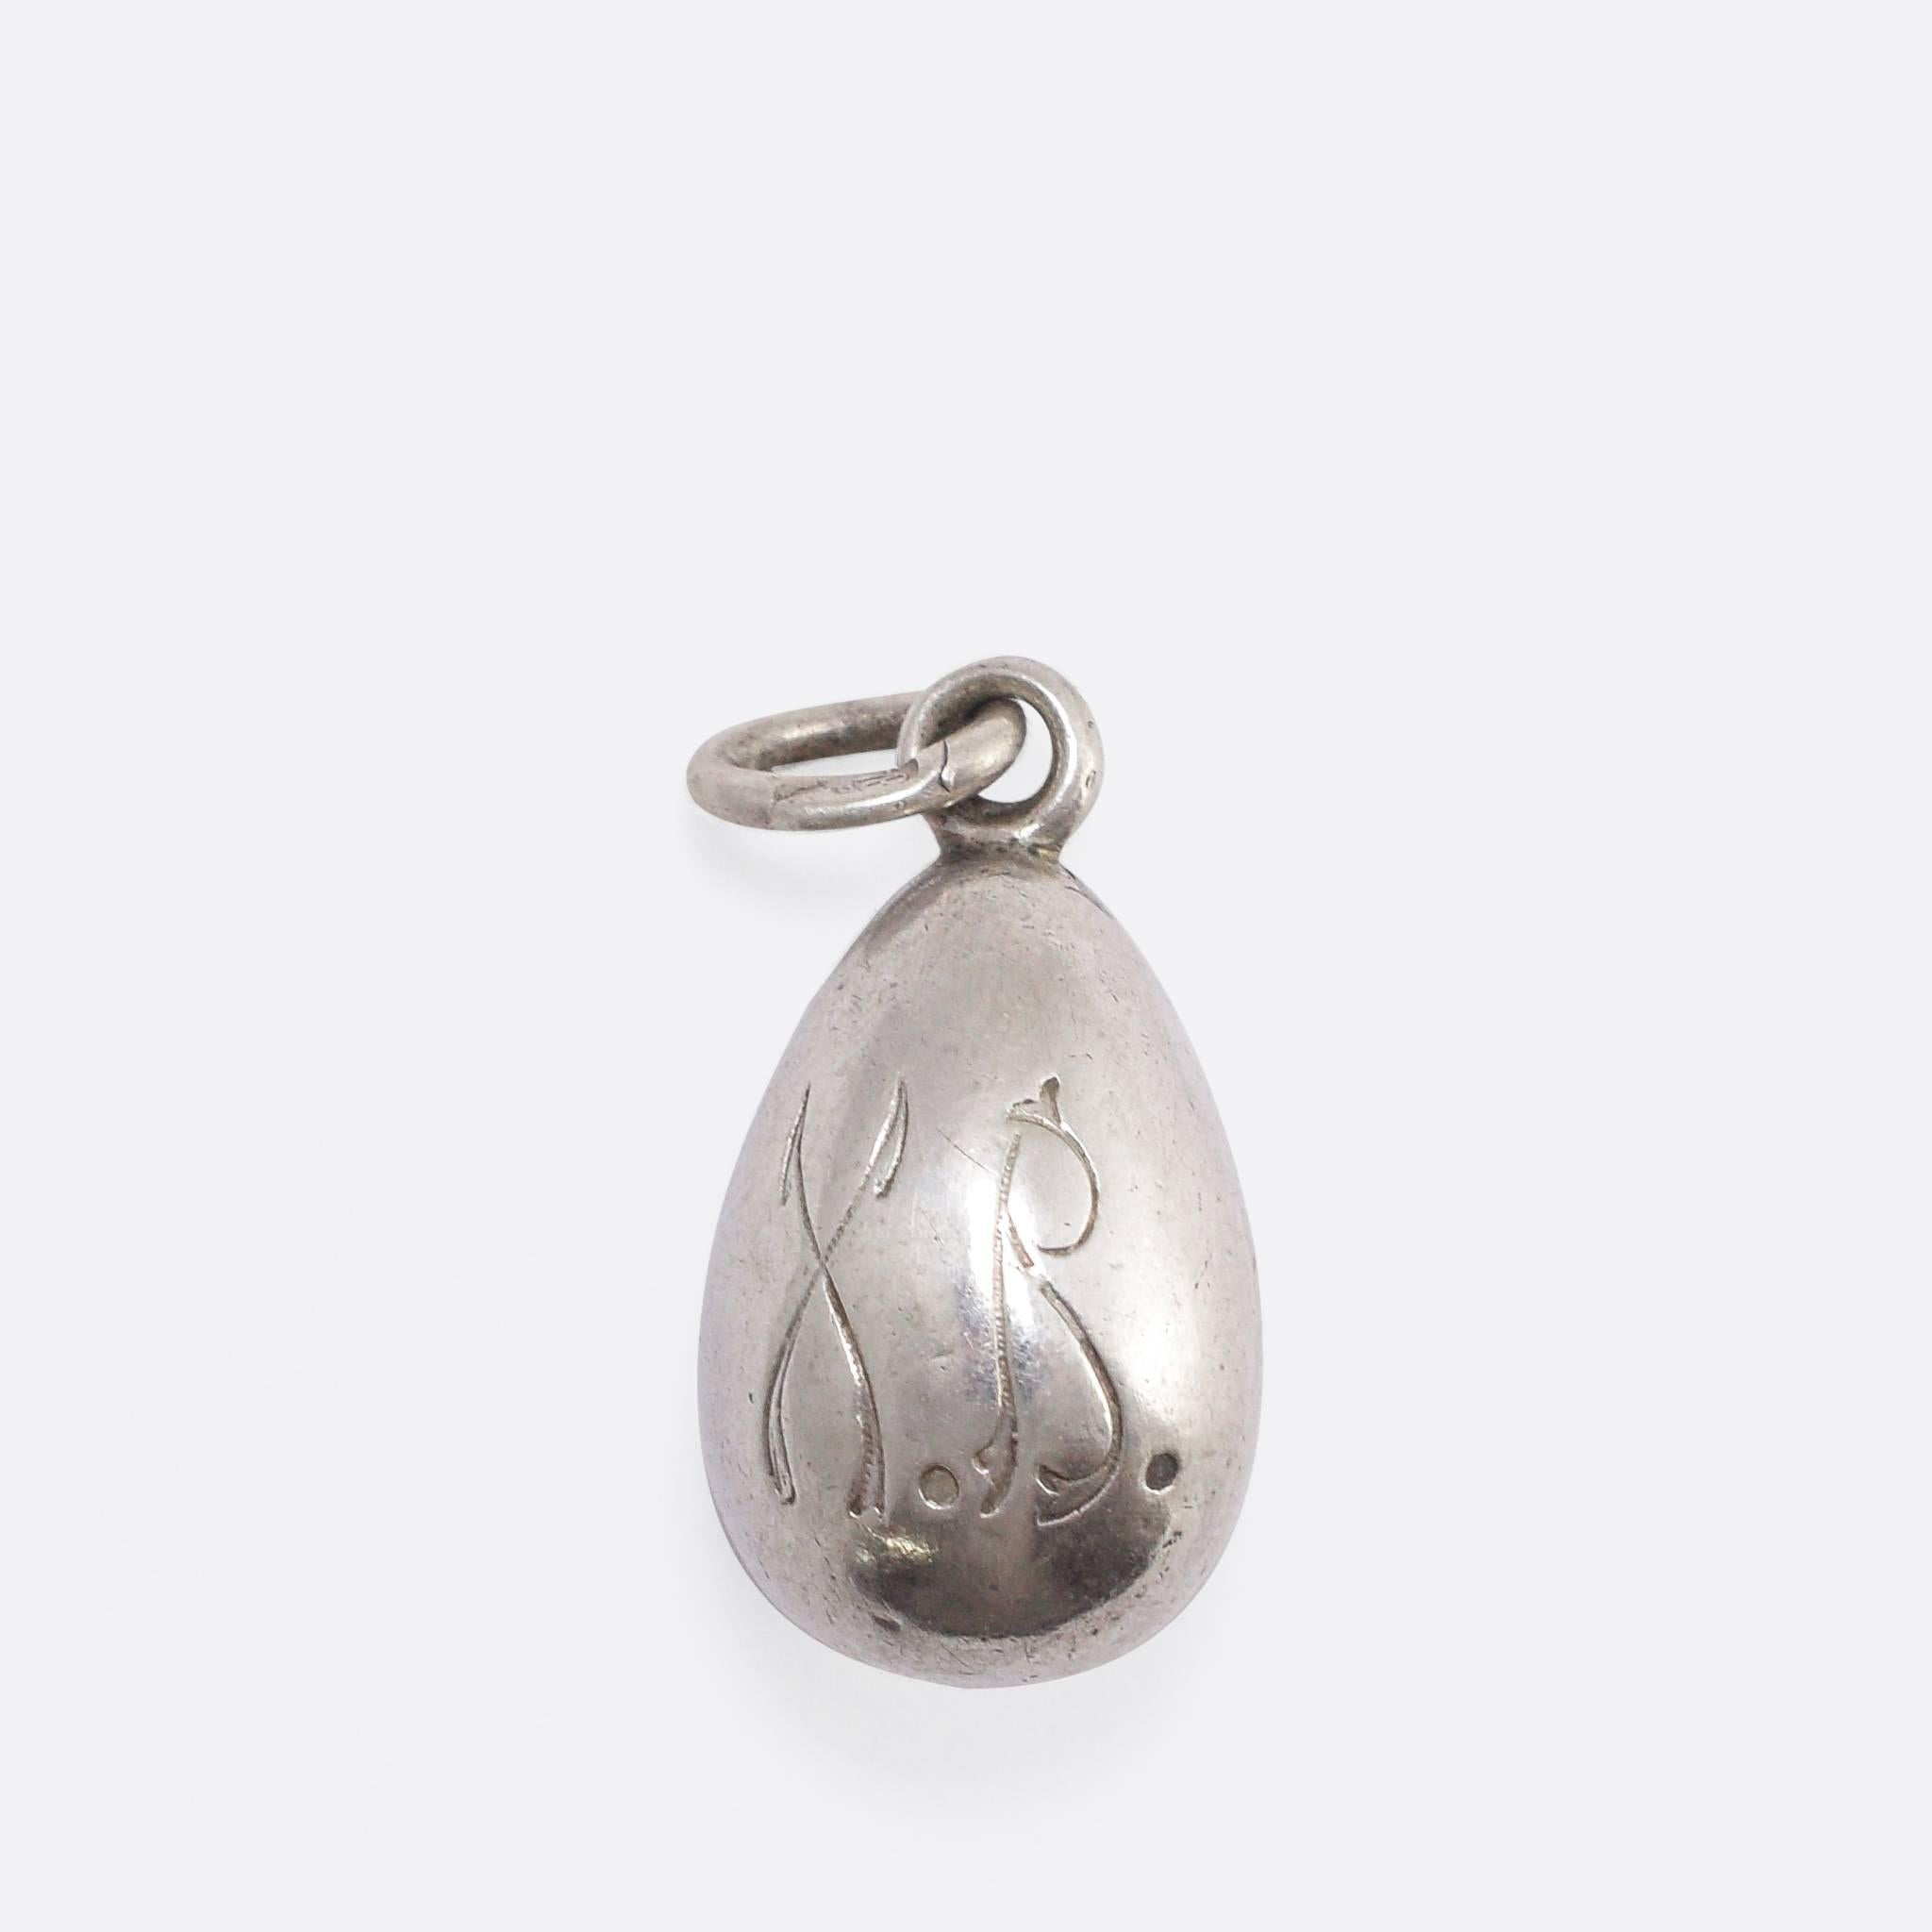 This antique Russian miniature egg pendant features a finely enamelled cherub on one side, and X.B. (Christ is Risen) on the other. Modelled in 84z (.875 grade) silver, the bail displays clear Russian marks dating it to c.1910. Of the exceptionally